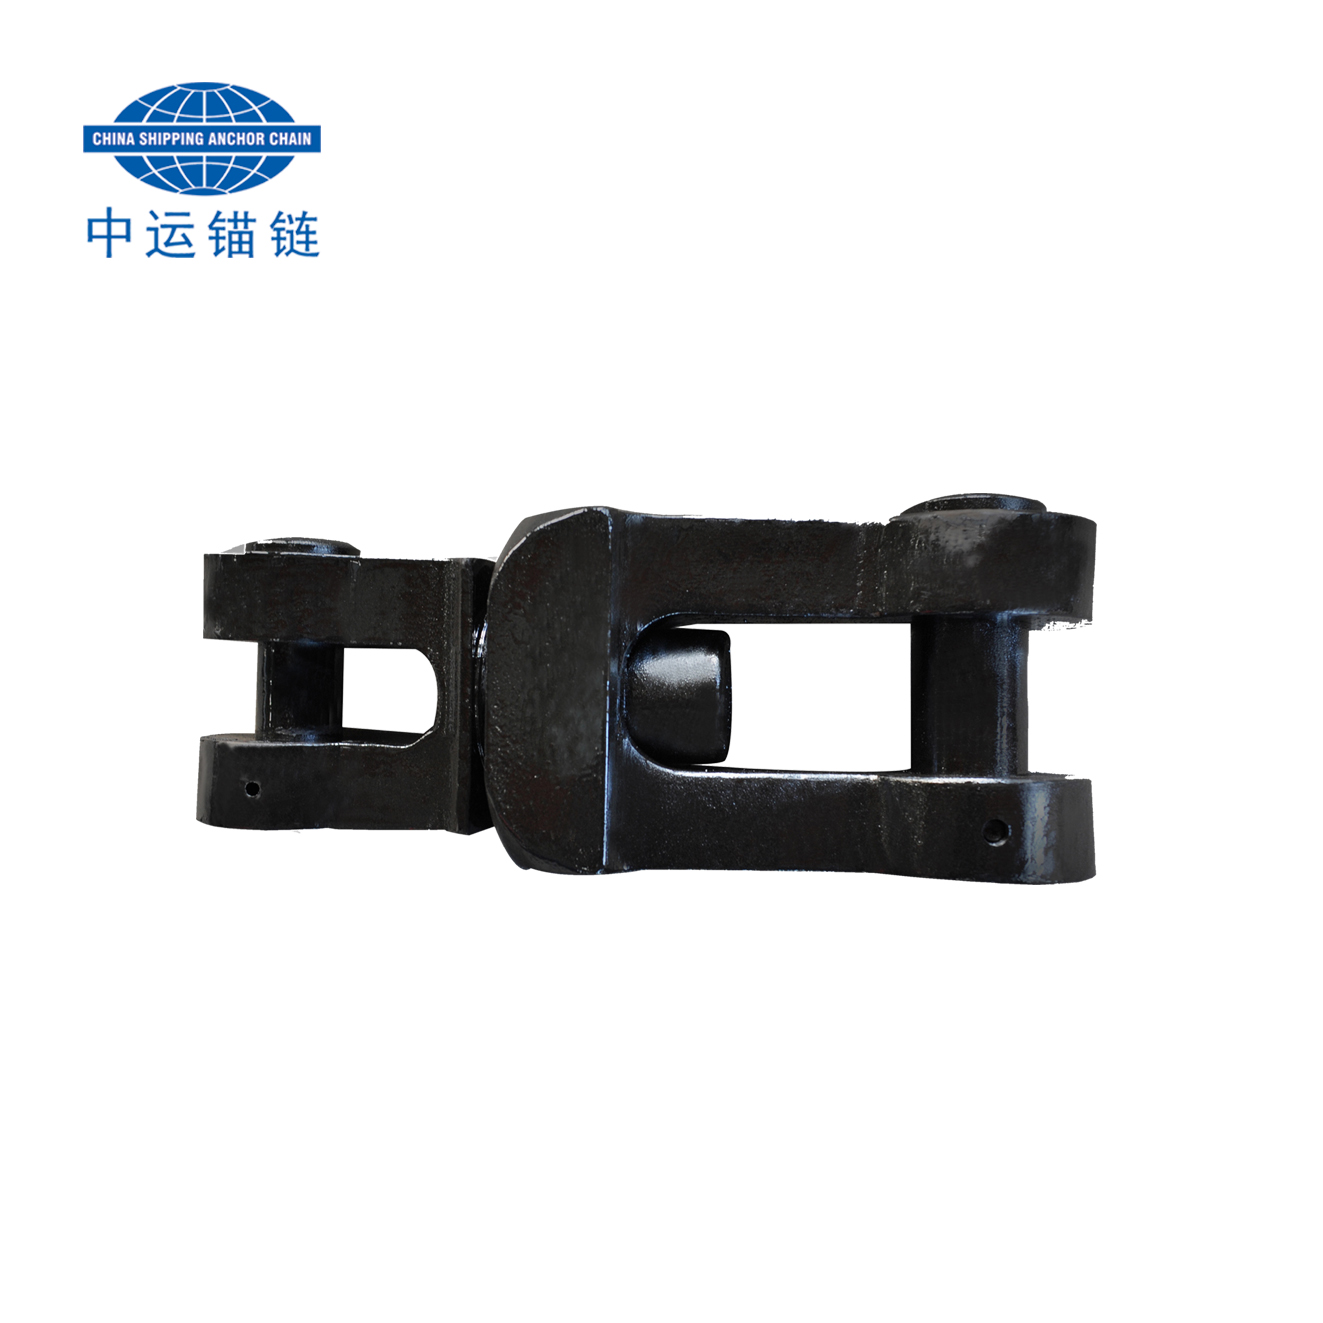 Type A Anchor Awivel Shackle